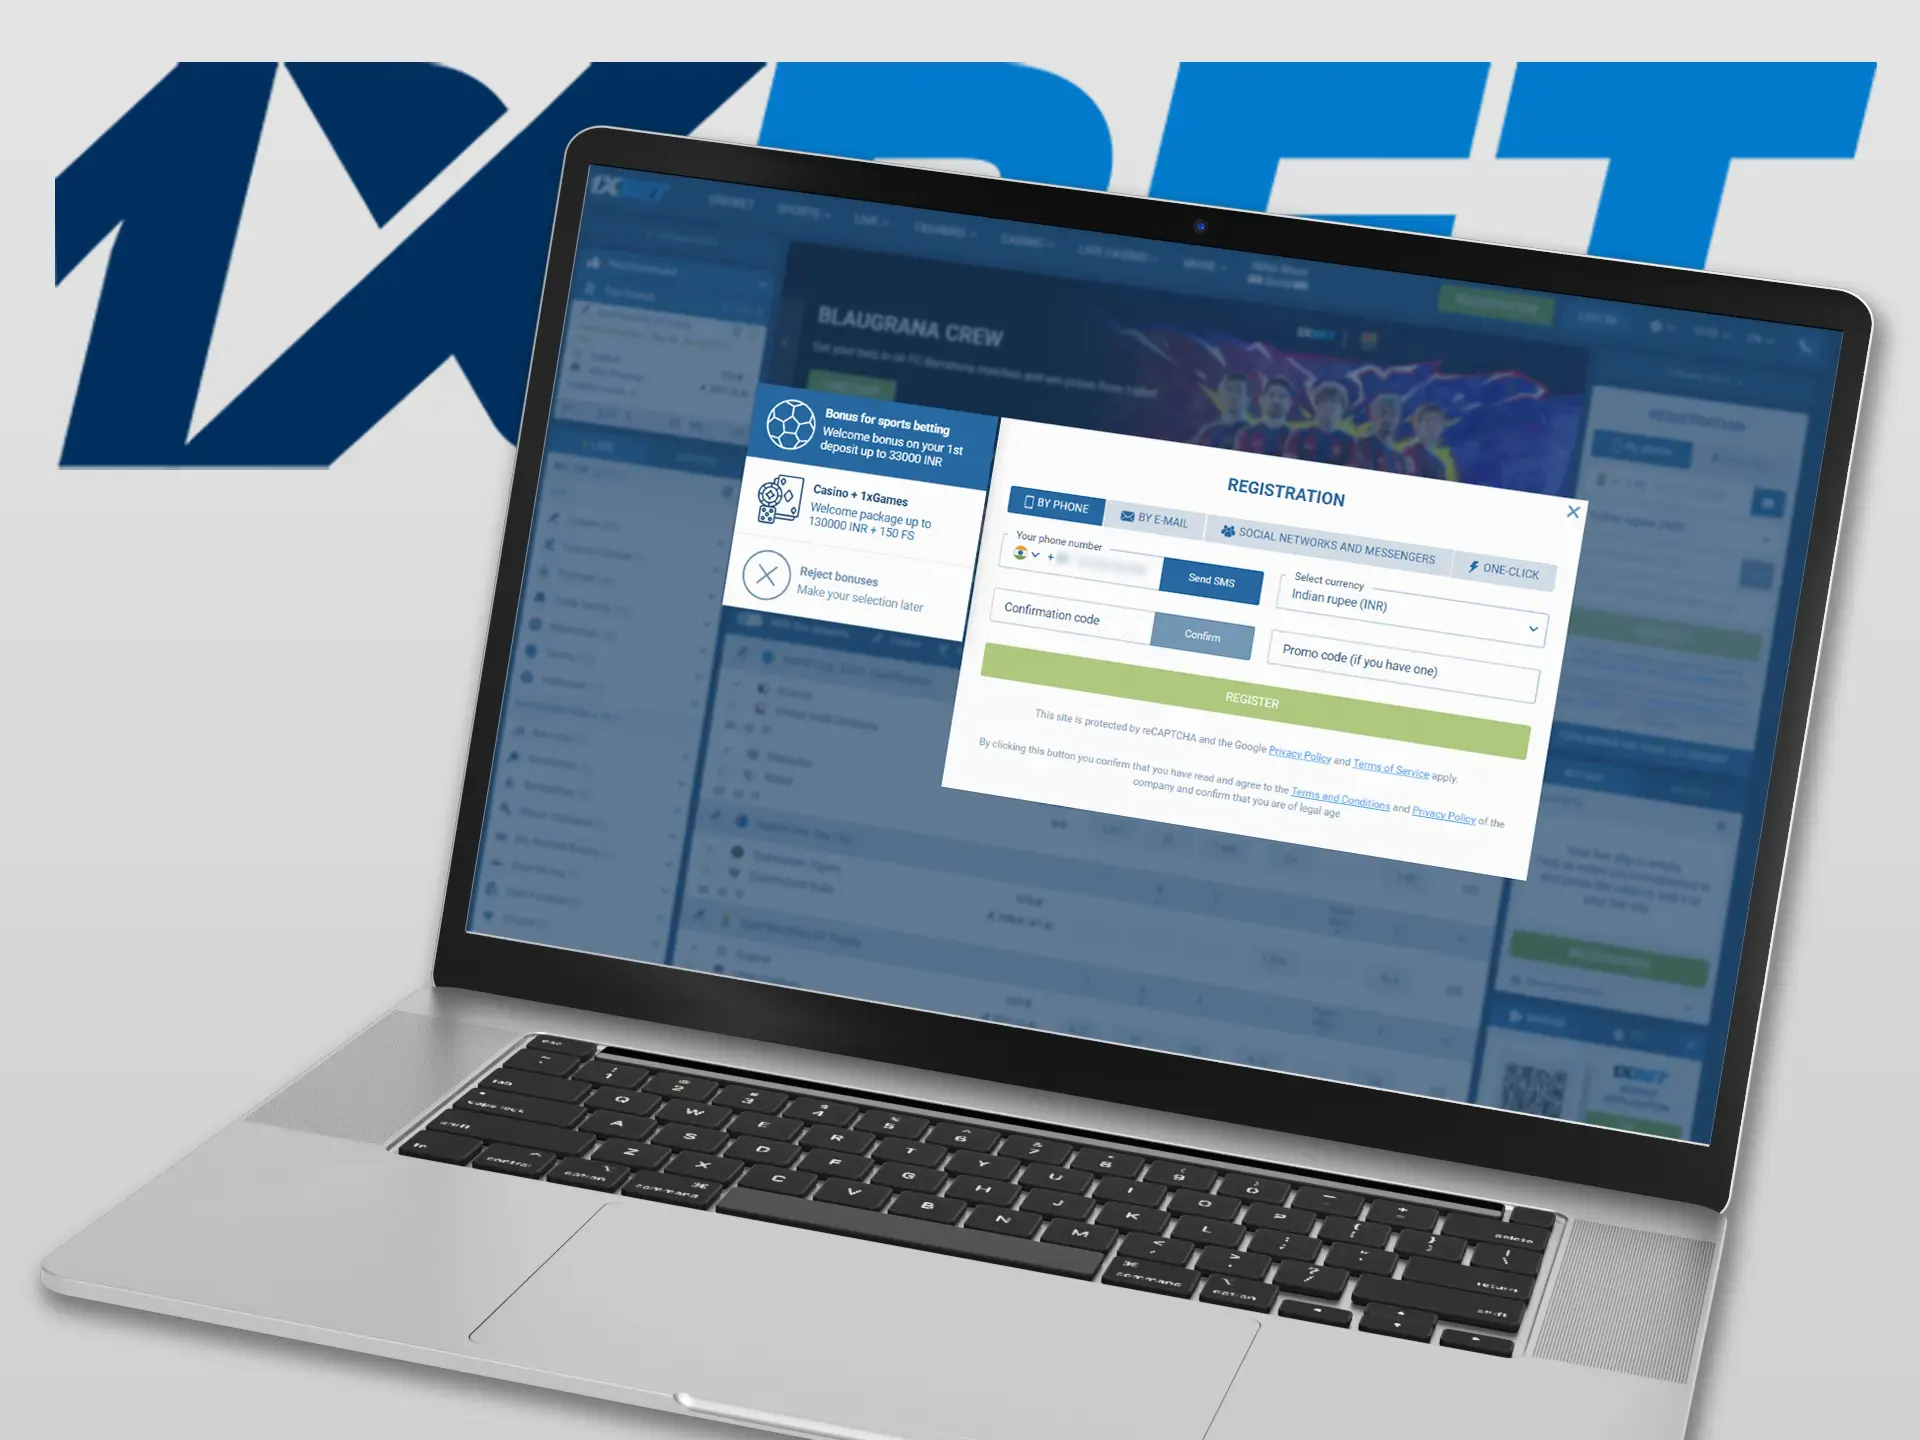 1xBet offers several ways to register a new account.